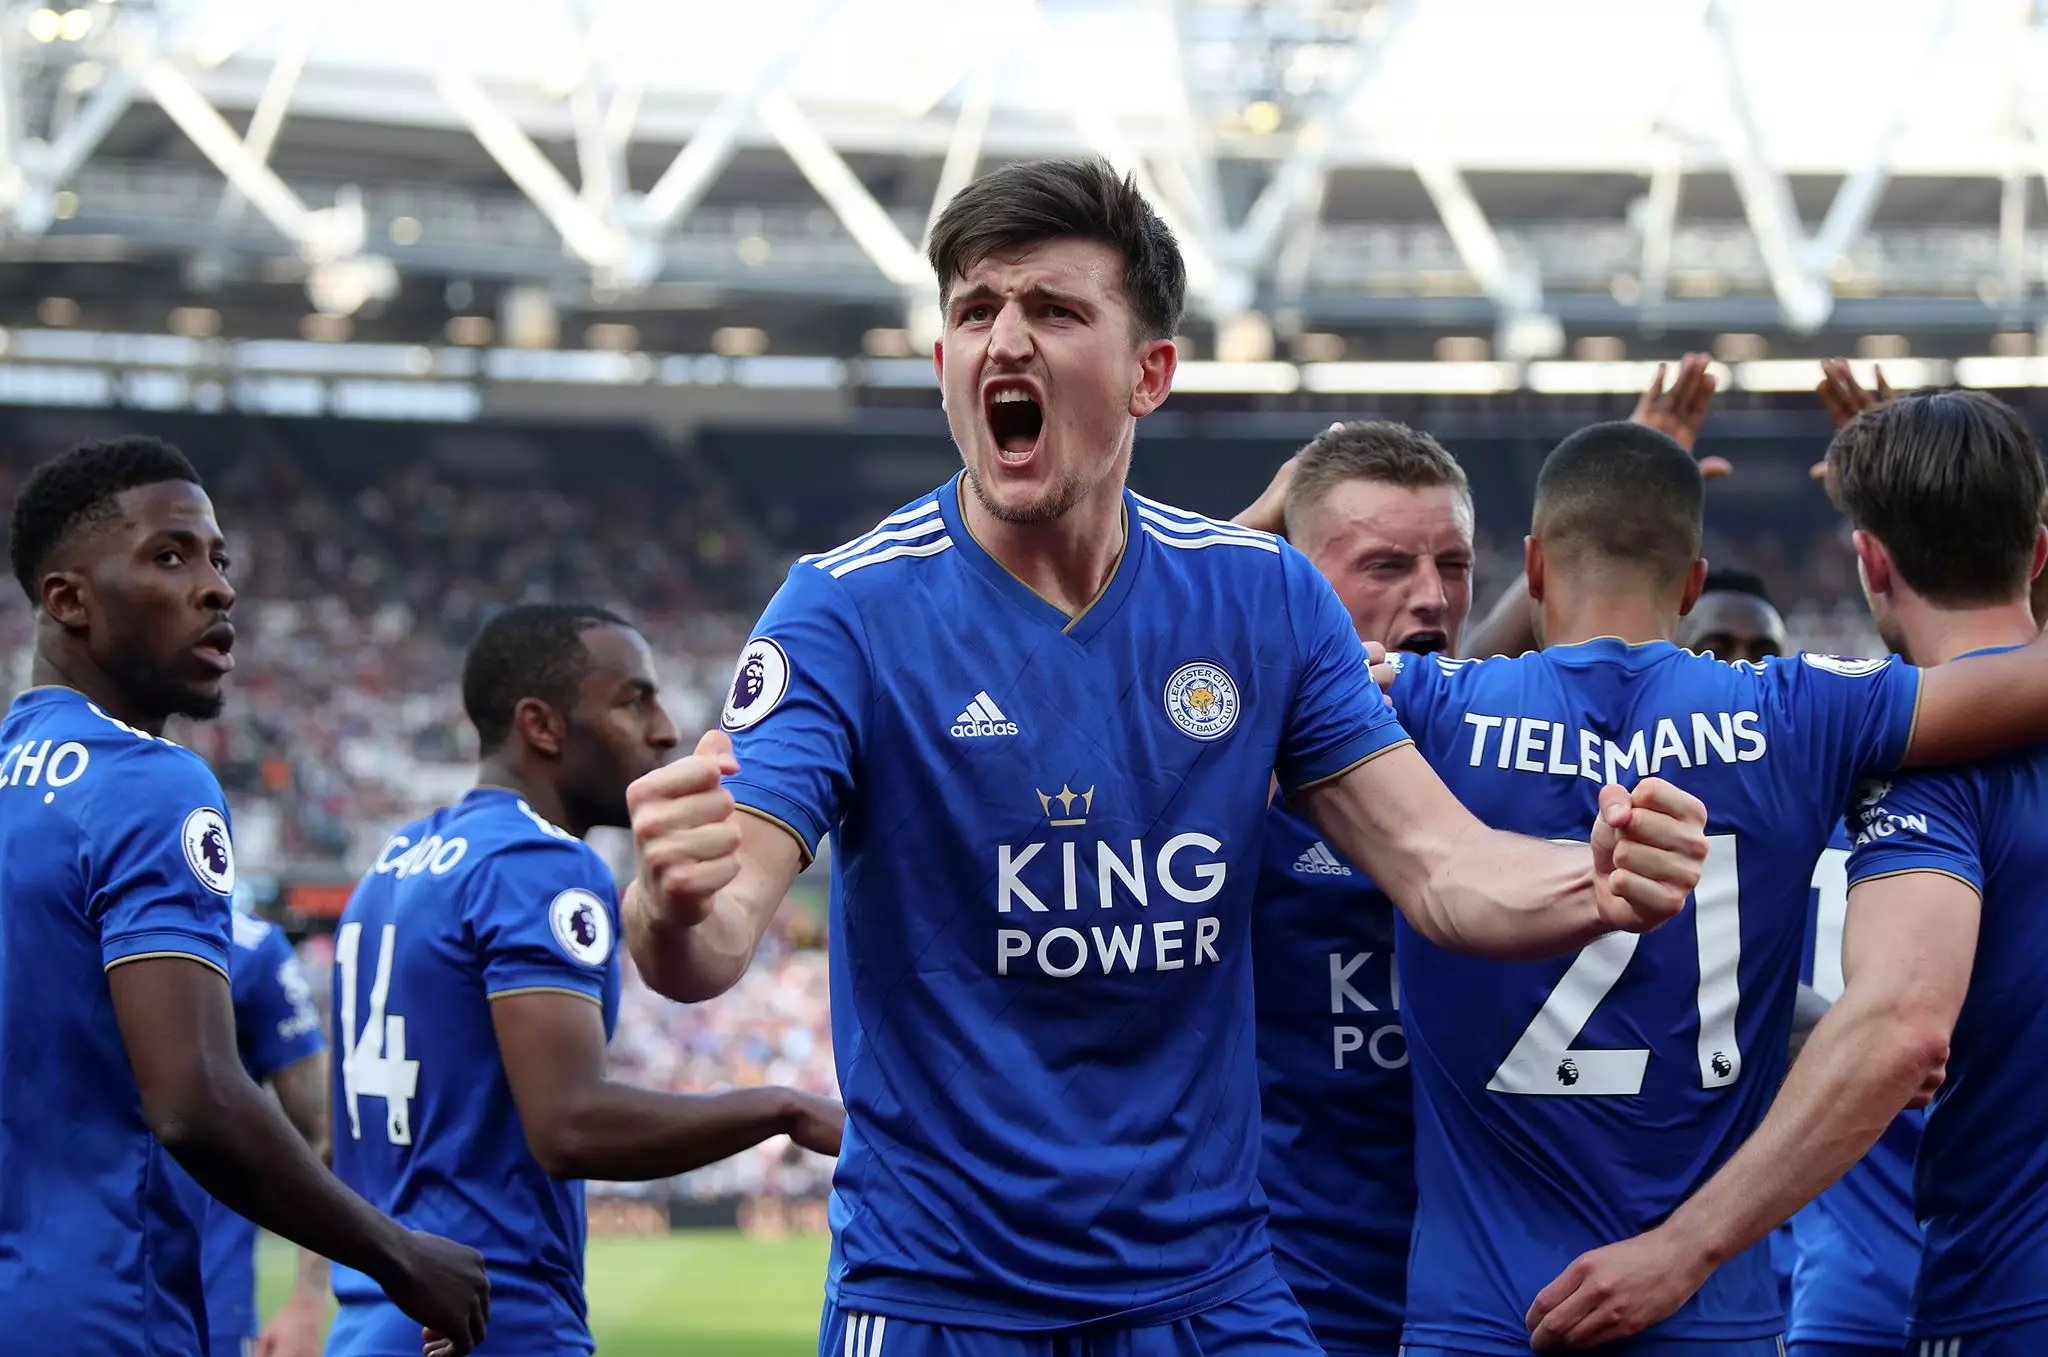 Maguire was heavily linked with United last summer. Image: PA Images